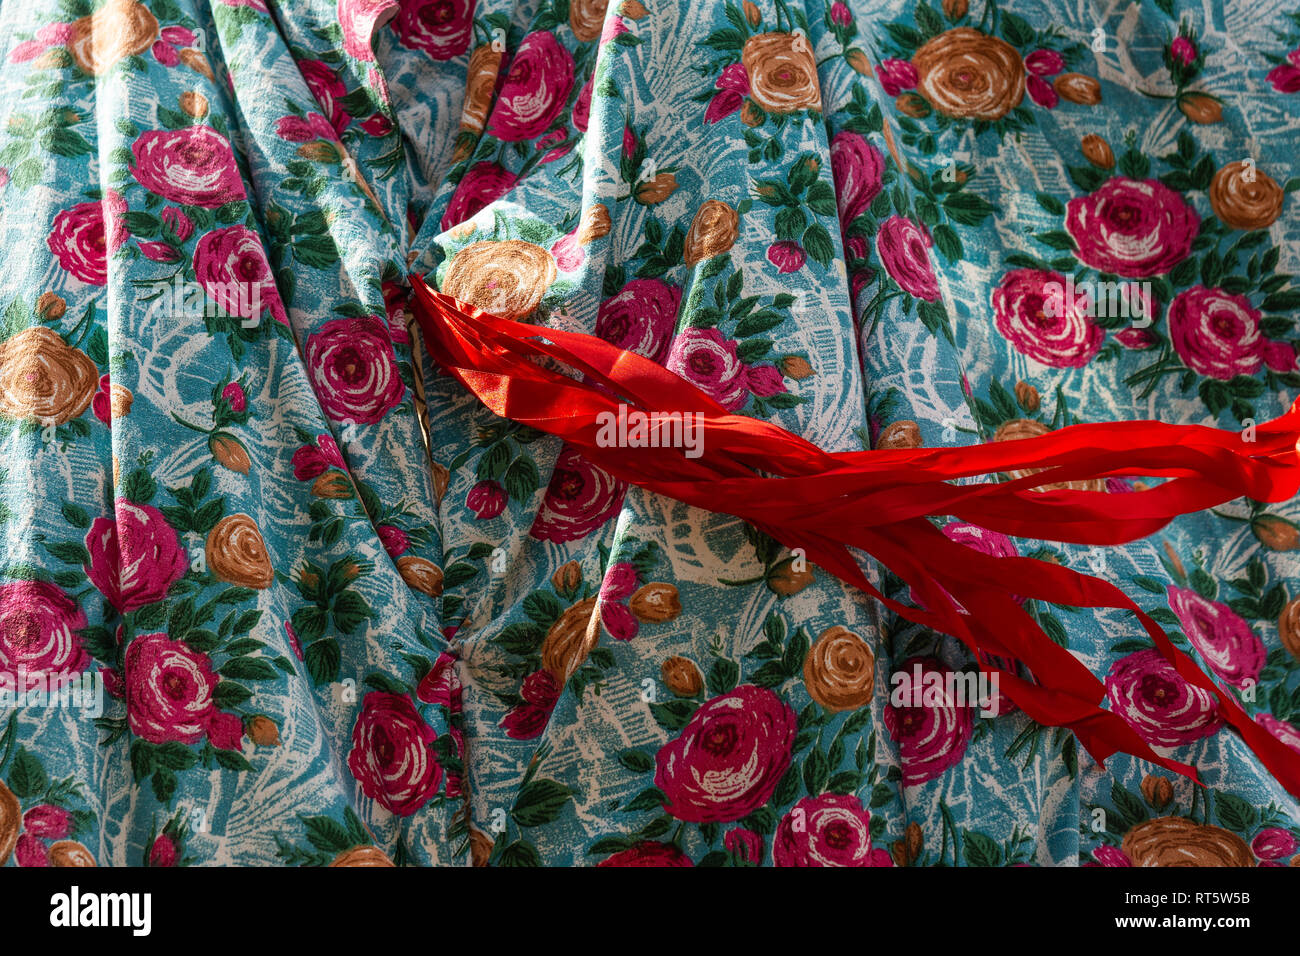 Bird's eye fabric decorated with red and yellow rose flower images and red ribbons waves in the wind. Beautiful designer pattern or background Stock Photo